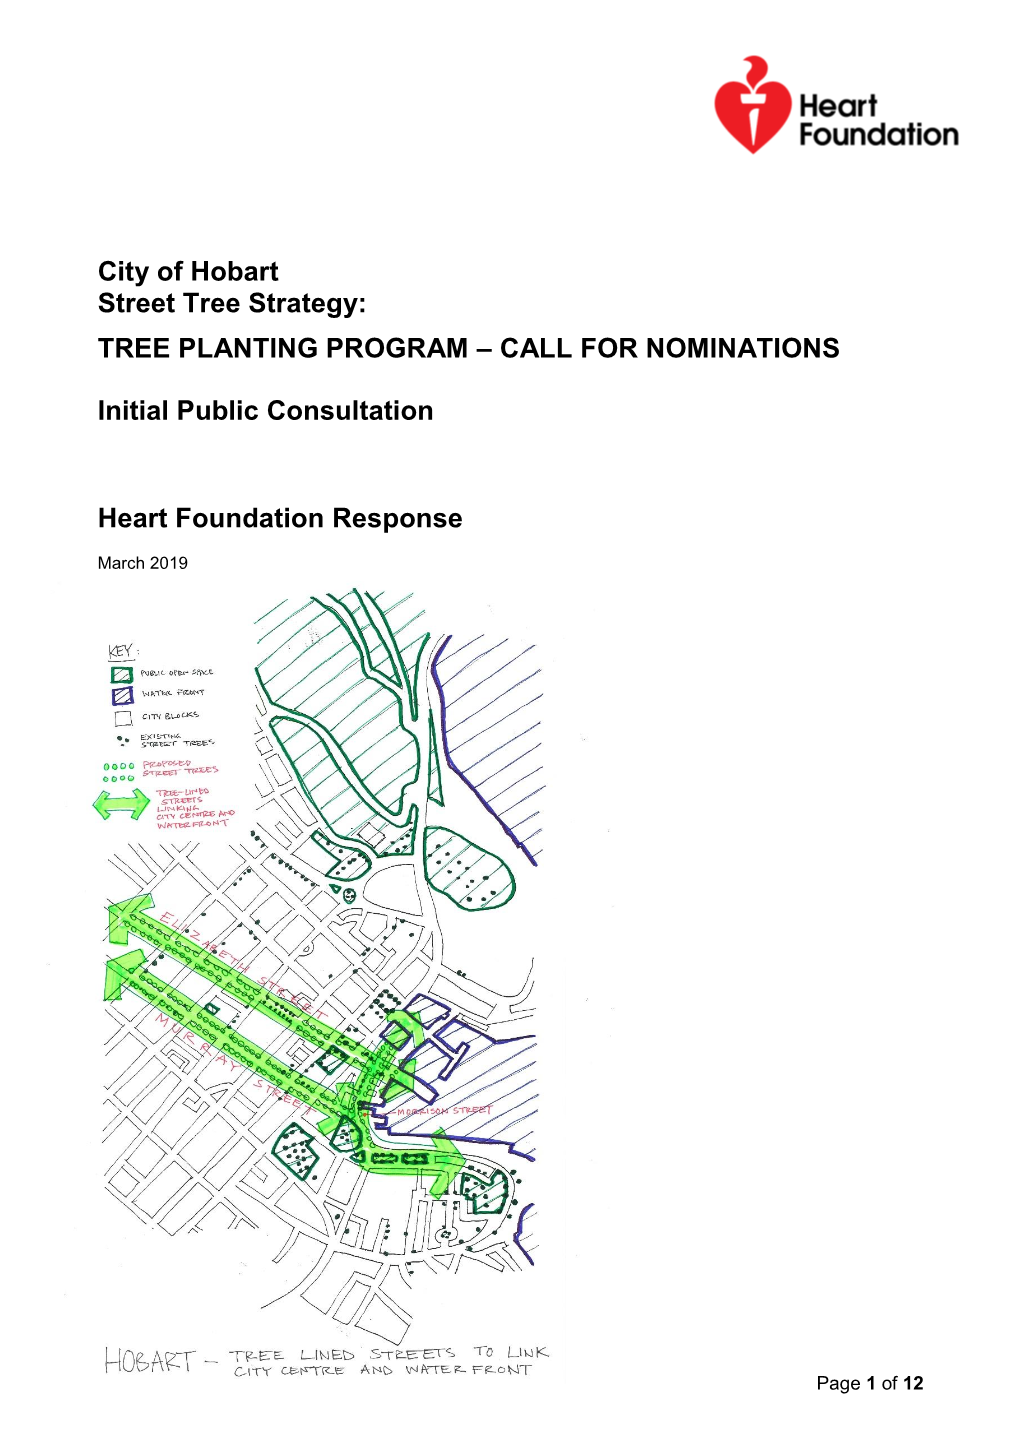 City of Hobart Street Tree Strategy: TREE PLANTING PROGRAM – CALL for NOMINATIONS